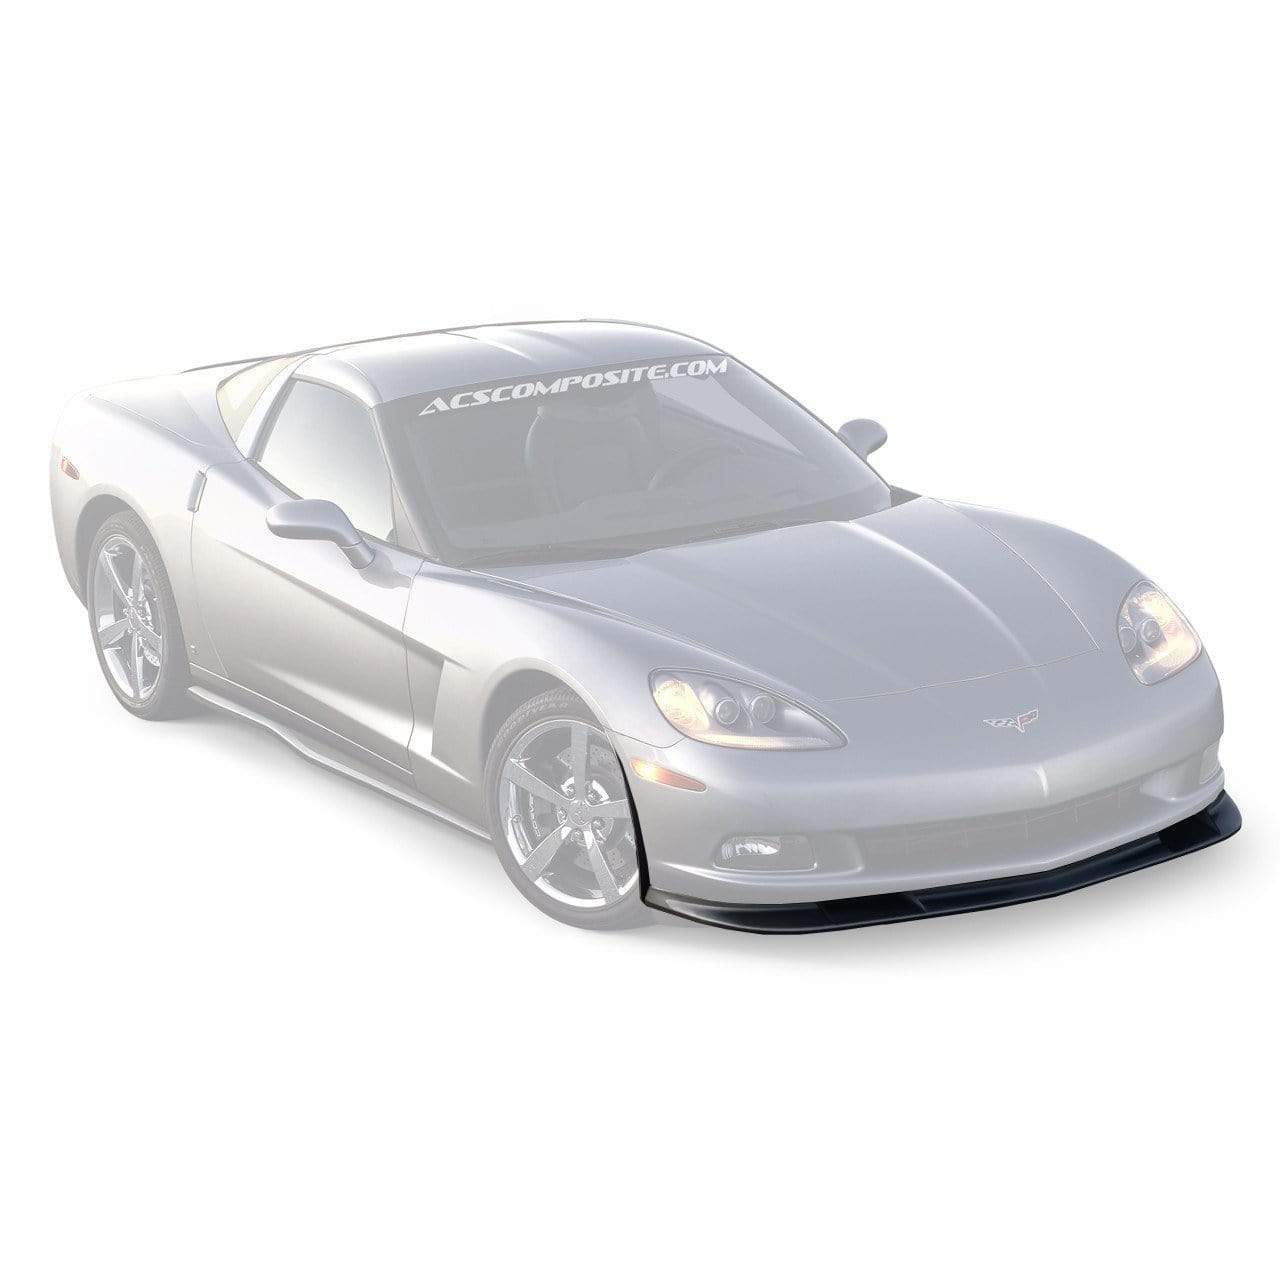 Zero6 Front Splitter for C6 Corvette in Carbon Flash Metallic Black [27-4-038]CFZ - ACS Composite. Adds downforce and improves braking performance with integrated brake cooling ducts. Optional front wheel deflectors available.